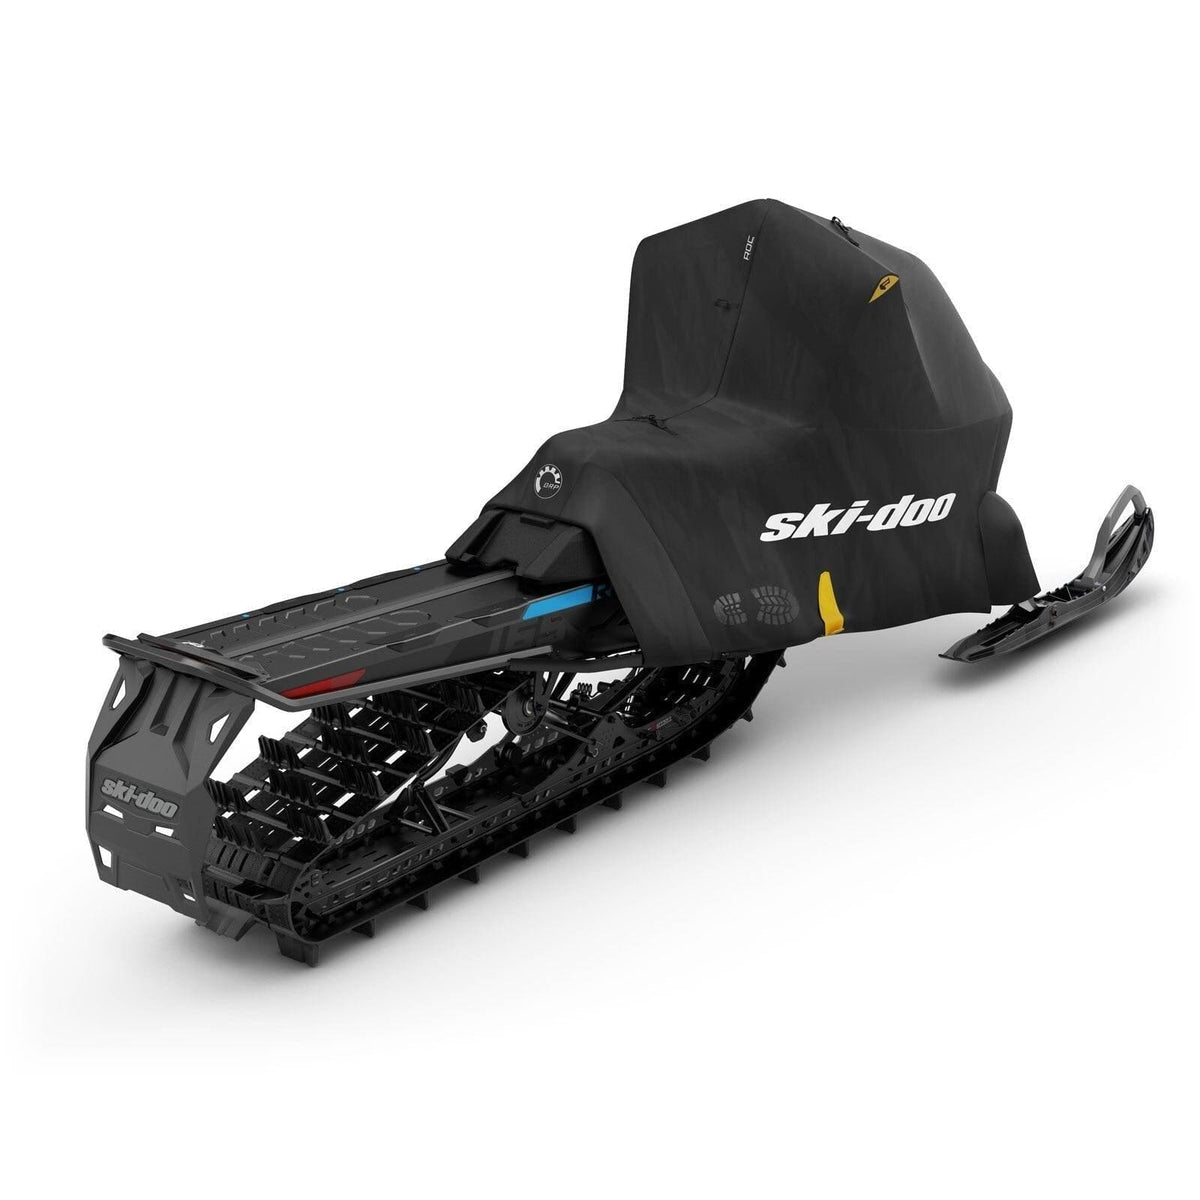 Ride On Cover (ROC) System - REV Gen4 MXZ, Renegade, Backcountry or Freeride 137 / 146 with High or Ultra High Windshield